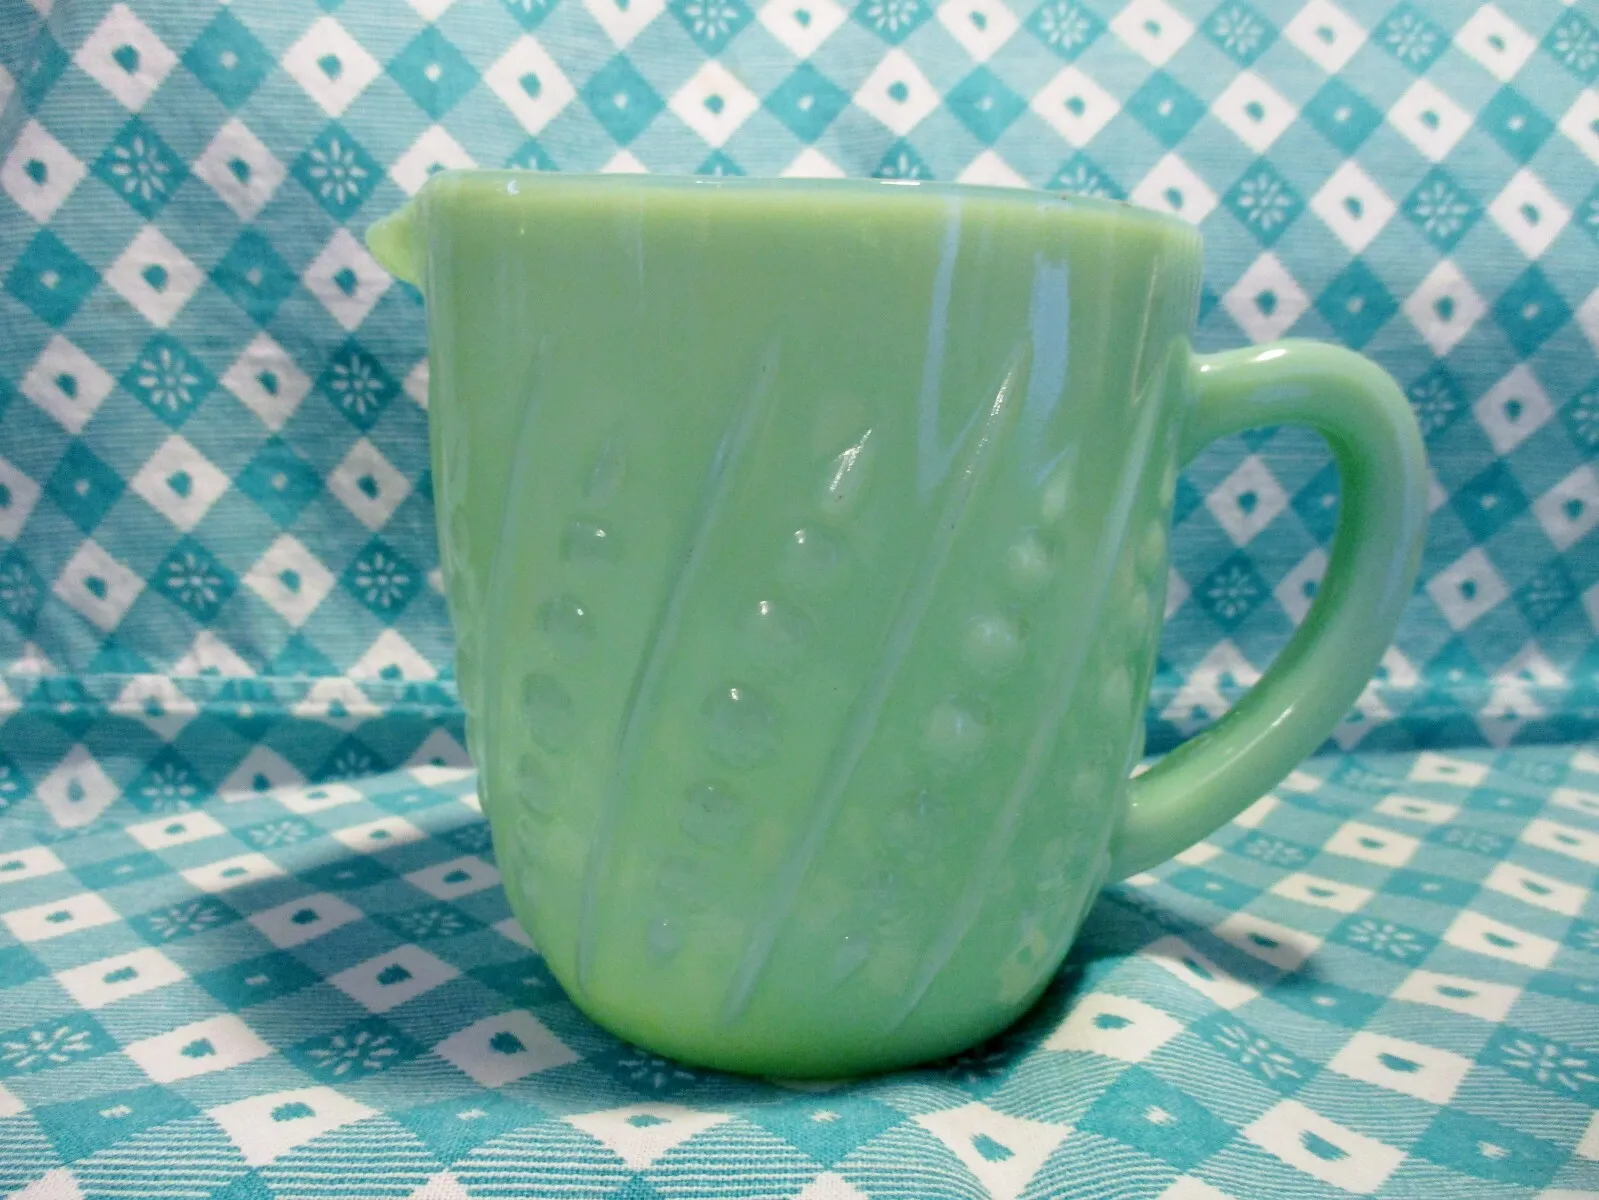 Jadeite Green Glass Bead and Bar Pitcher in Excellent Condition - $68.00